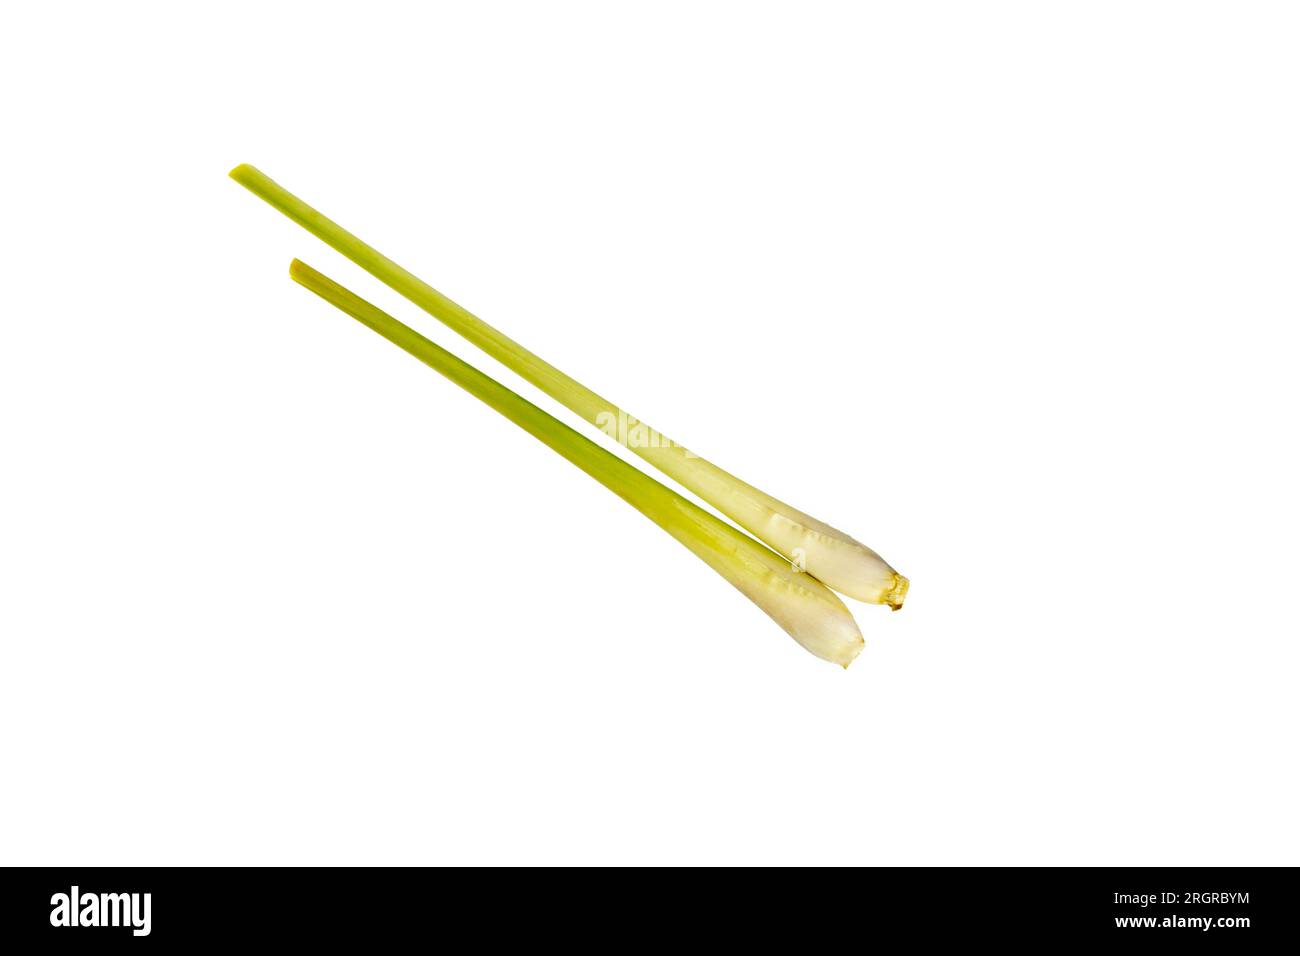 Lemongrass or of the scientific name Cymbopogon Citratus isolated on a white background. Stock Photo